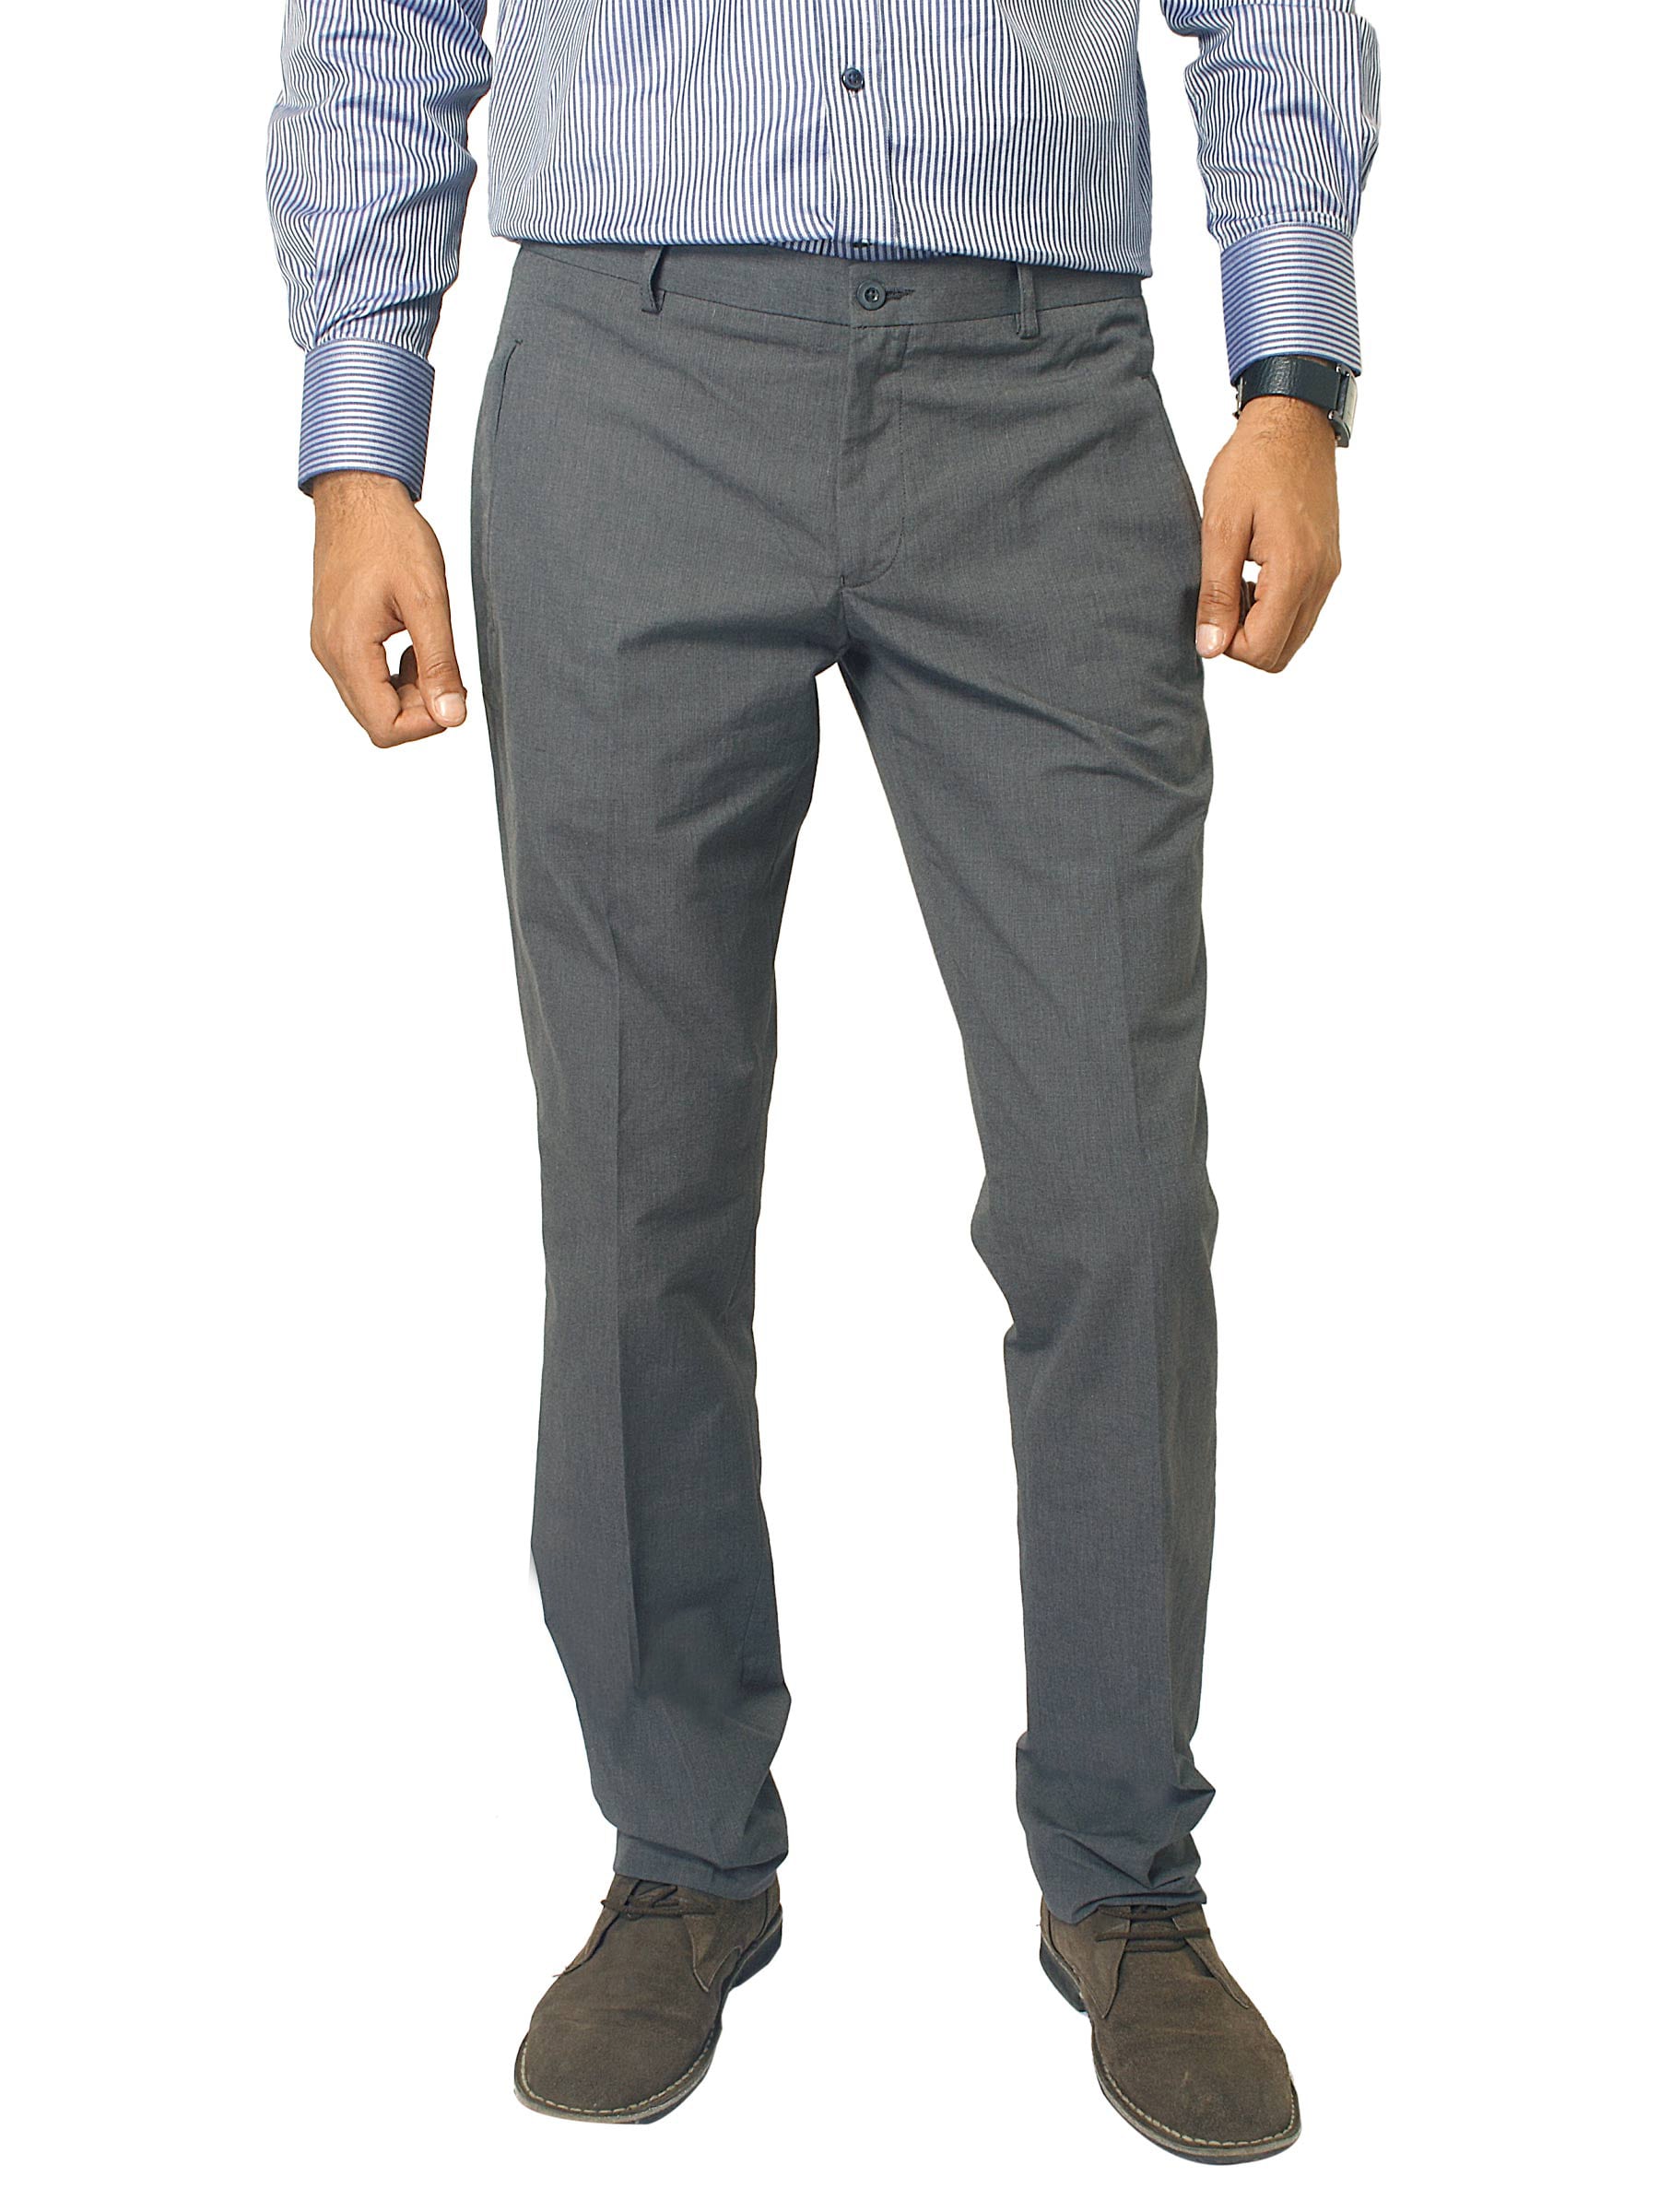 United Colors of Benetton Men Solid Grey Trousers